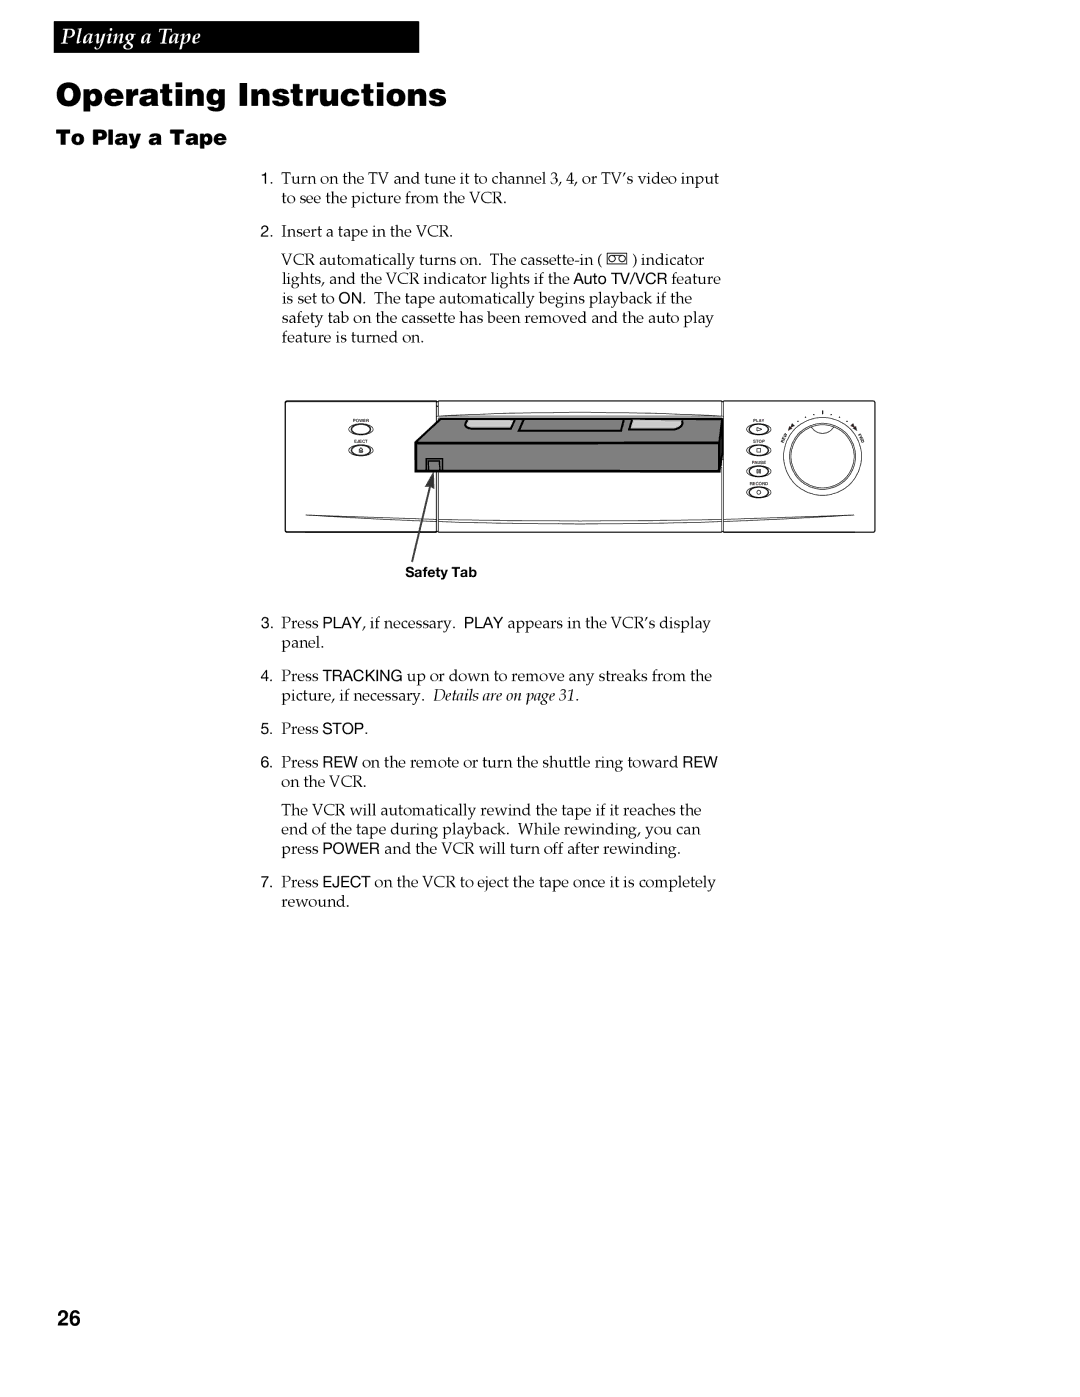 RCA VR688HF manual Operating Instructions, To Play a Tape 